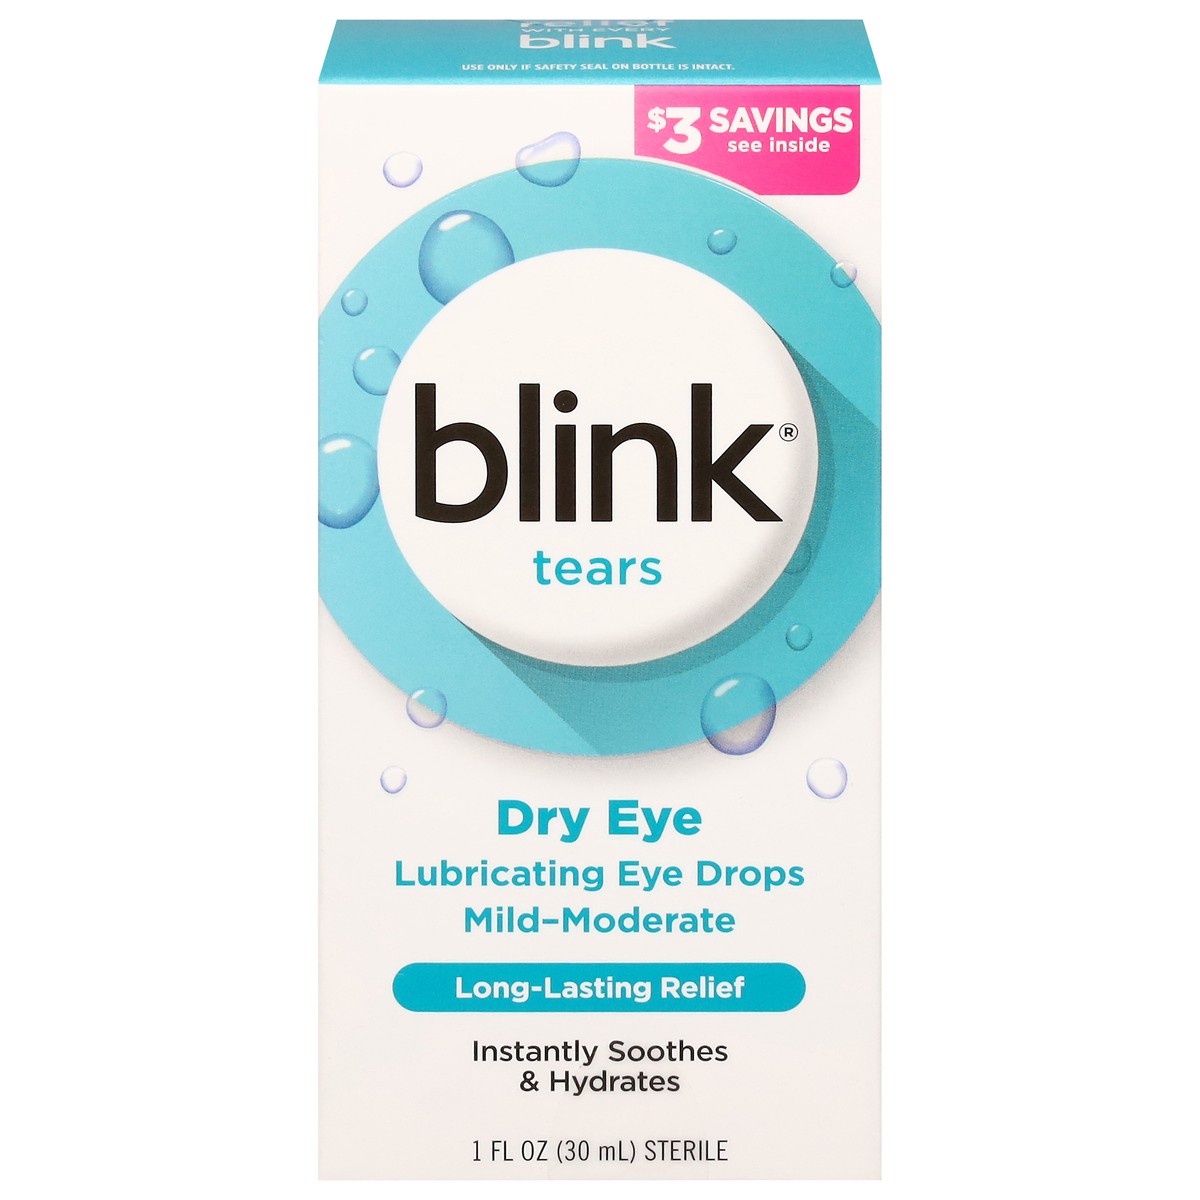 slide 1 of 9, Blink Tears Lubricating Eye Drops, Eye Care for Mild to Moderate Dry Eyes, Hyaluronate for Boosting Hydration, Moisturizing & Soothing Eye Drops for Dry Eyes, 1 fl oz (30 mL)
, 30 ml